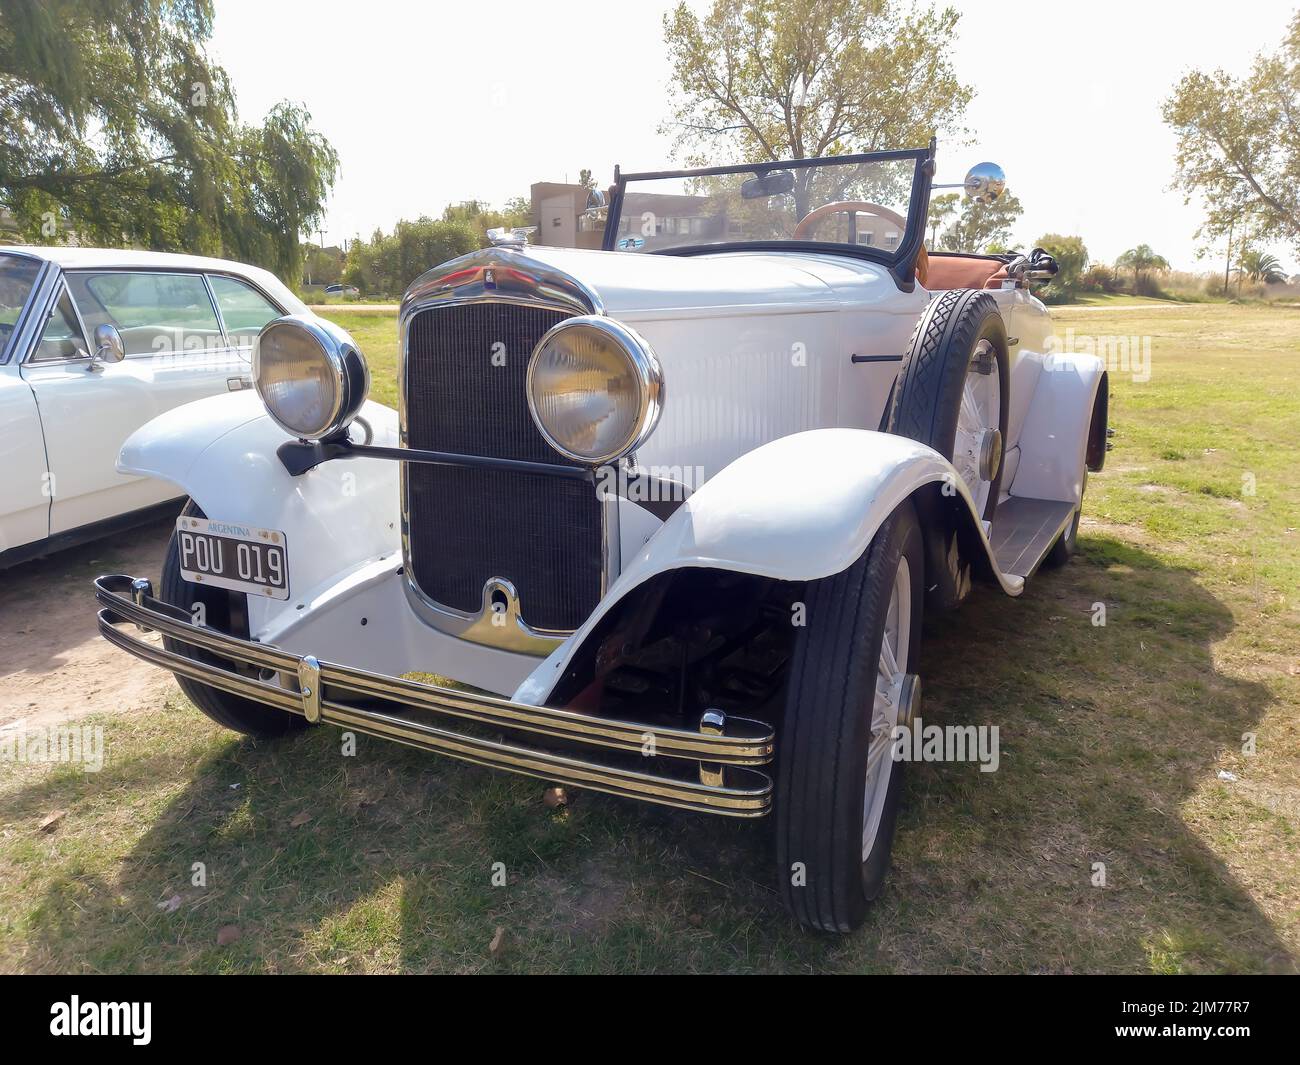 Old white Chrysler Plymouth roadster circa 1930 parked in the countryside. Nature grass and trees background. Classic car show. Stock Photo